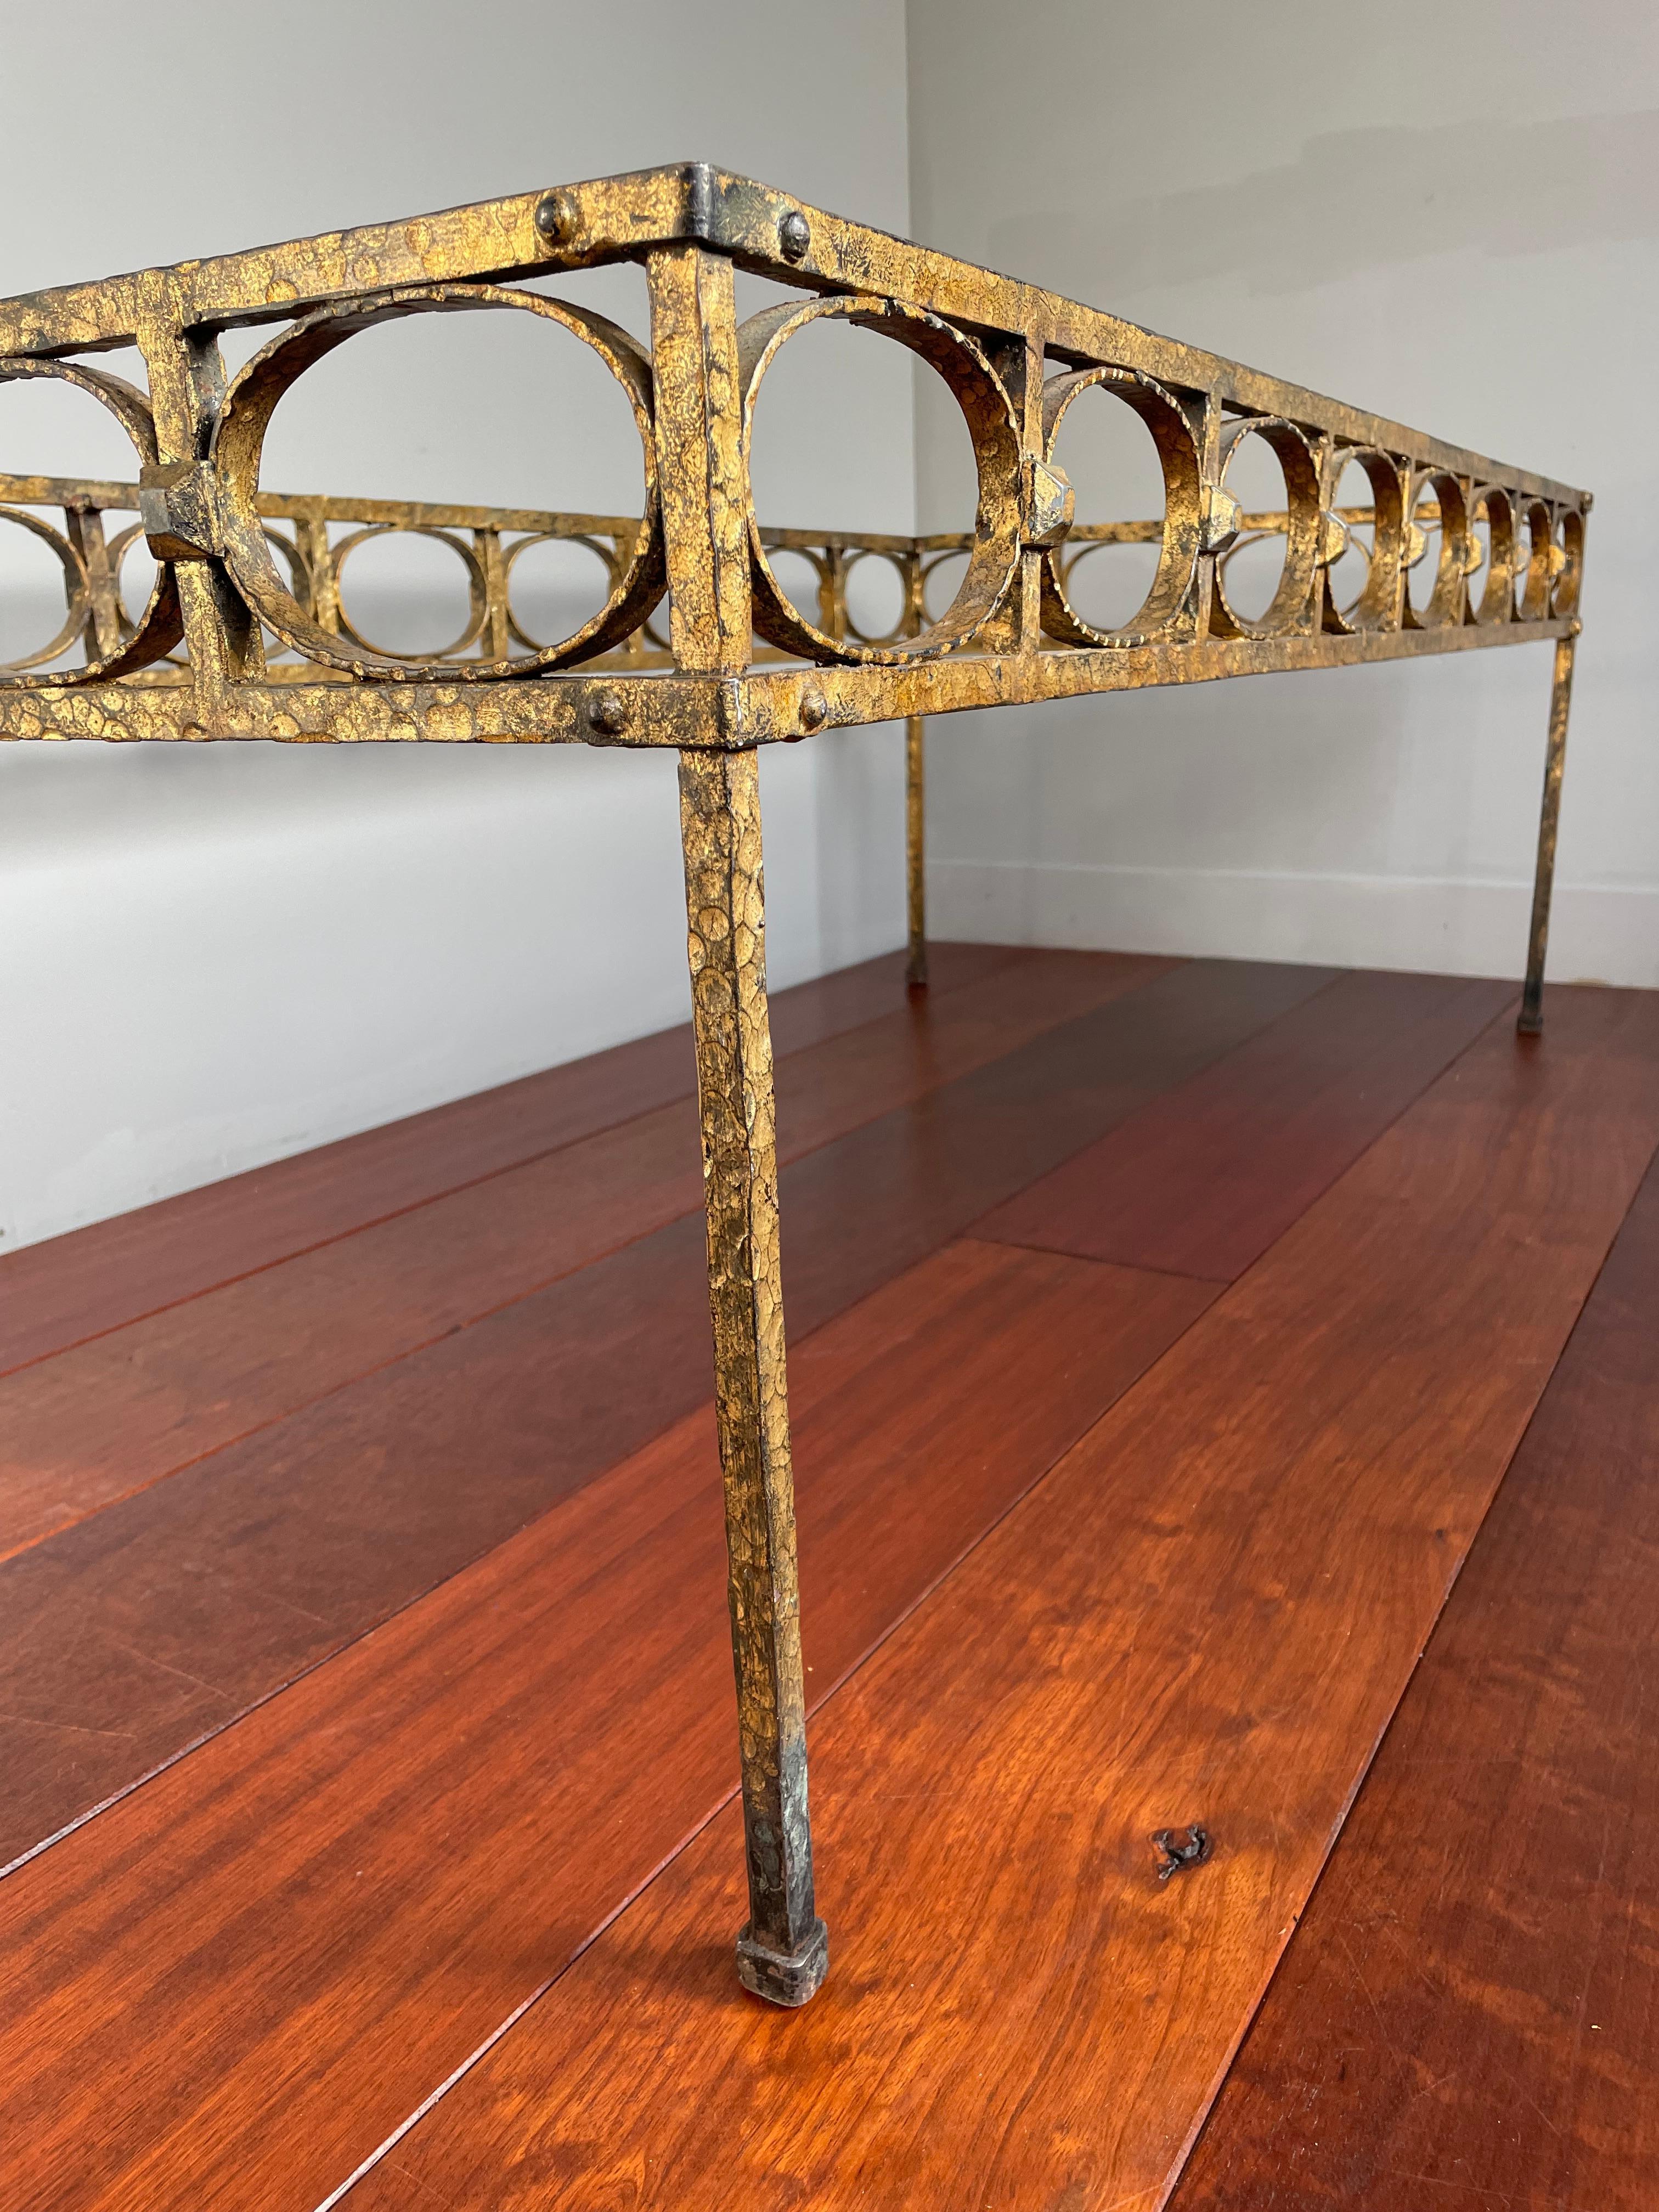 Stunning Midcentury Modern Gilt Wrought Iron Coffee Table Base by Ferro Art 1950 For Sale 10